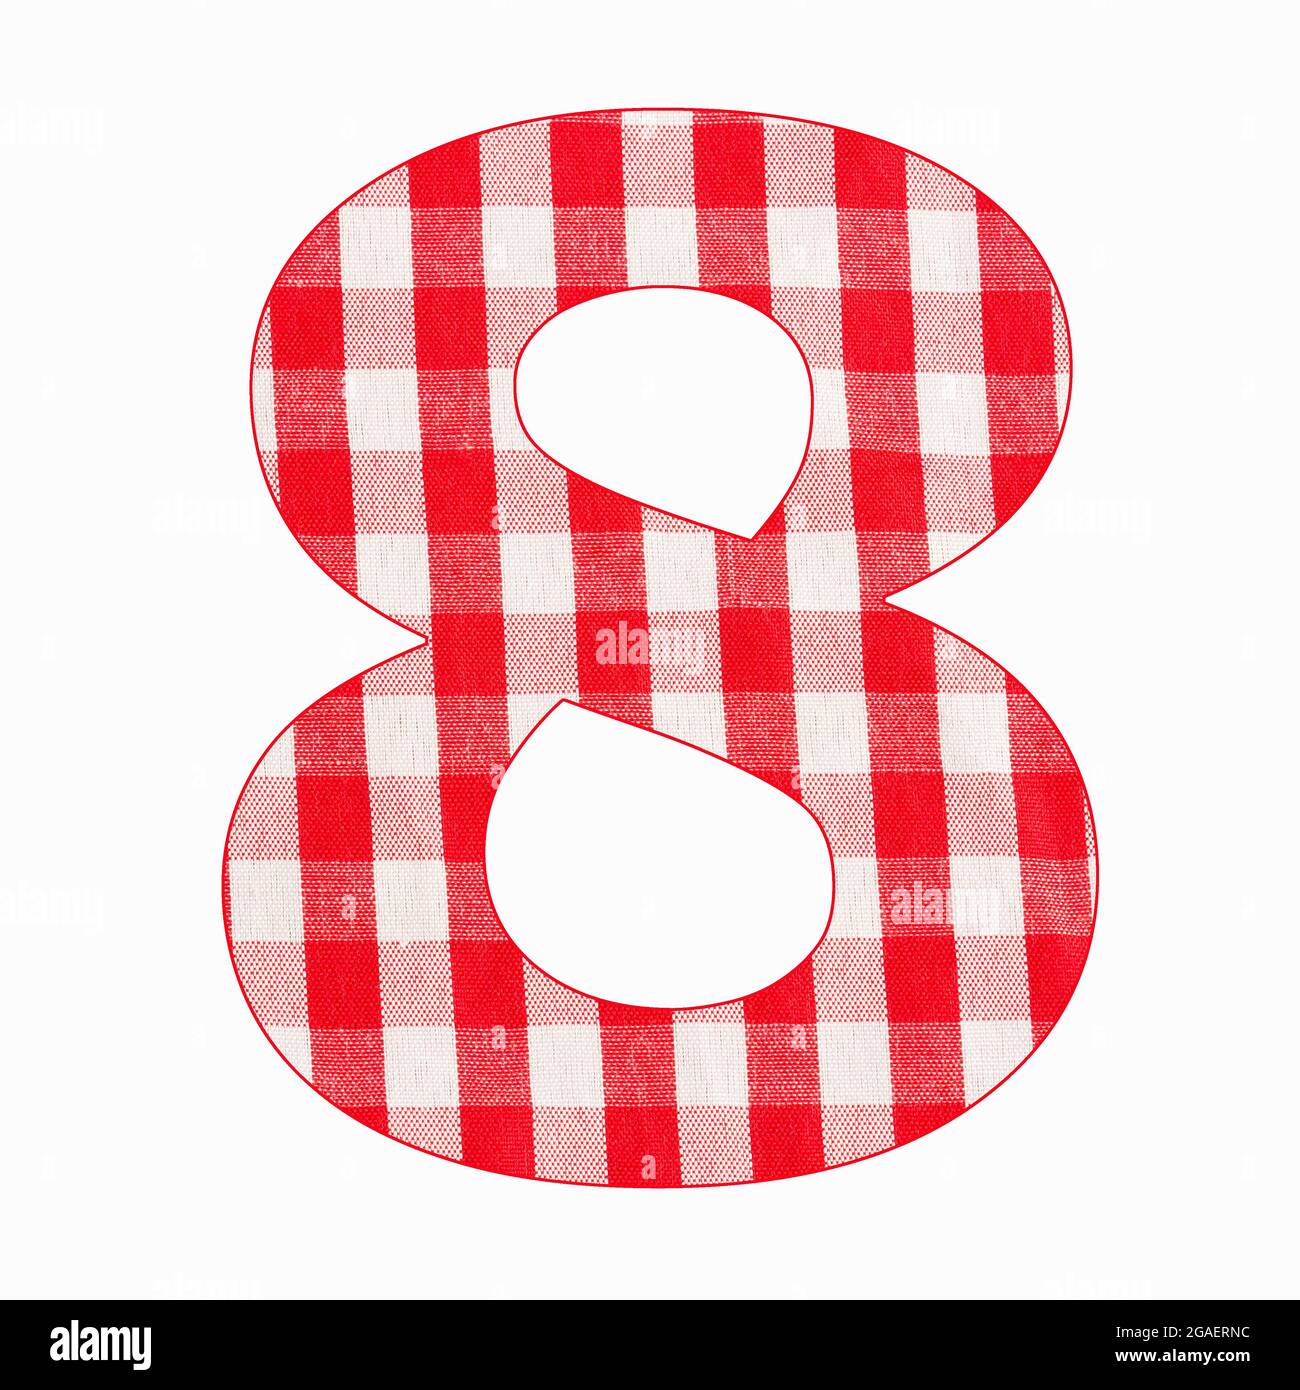 https://c8.alamy.com/comp/2GAERNC/number-8-eight-red-checkered-fabric-tablecloth-2GAERNC.jpg